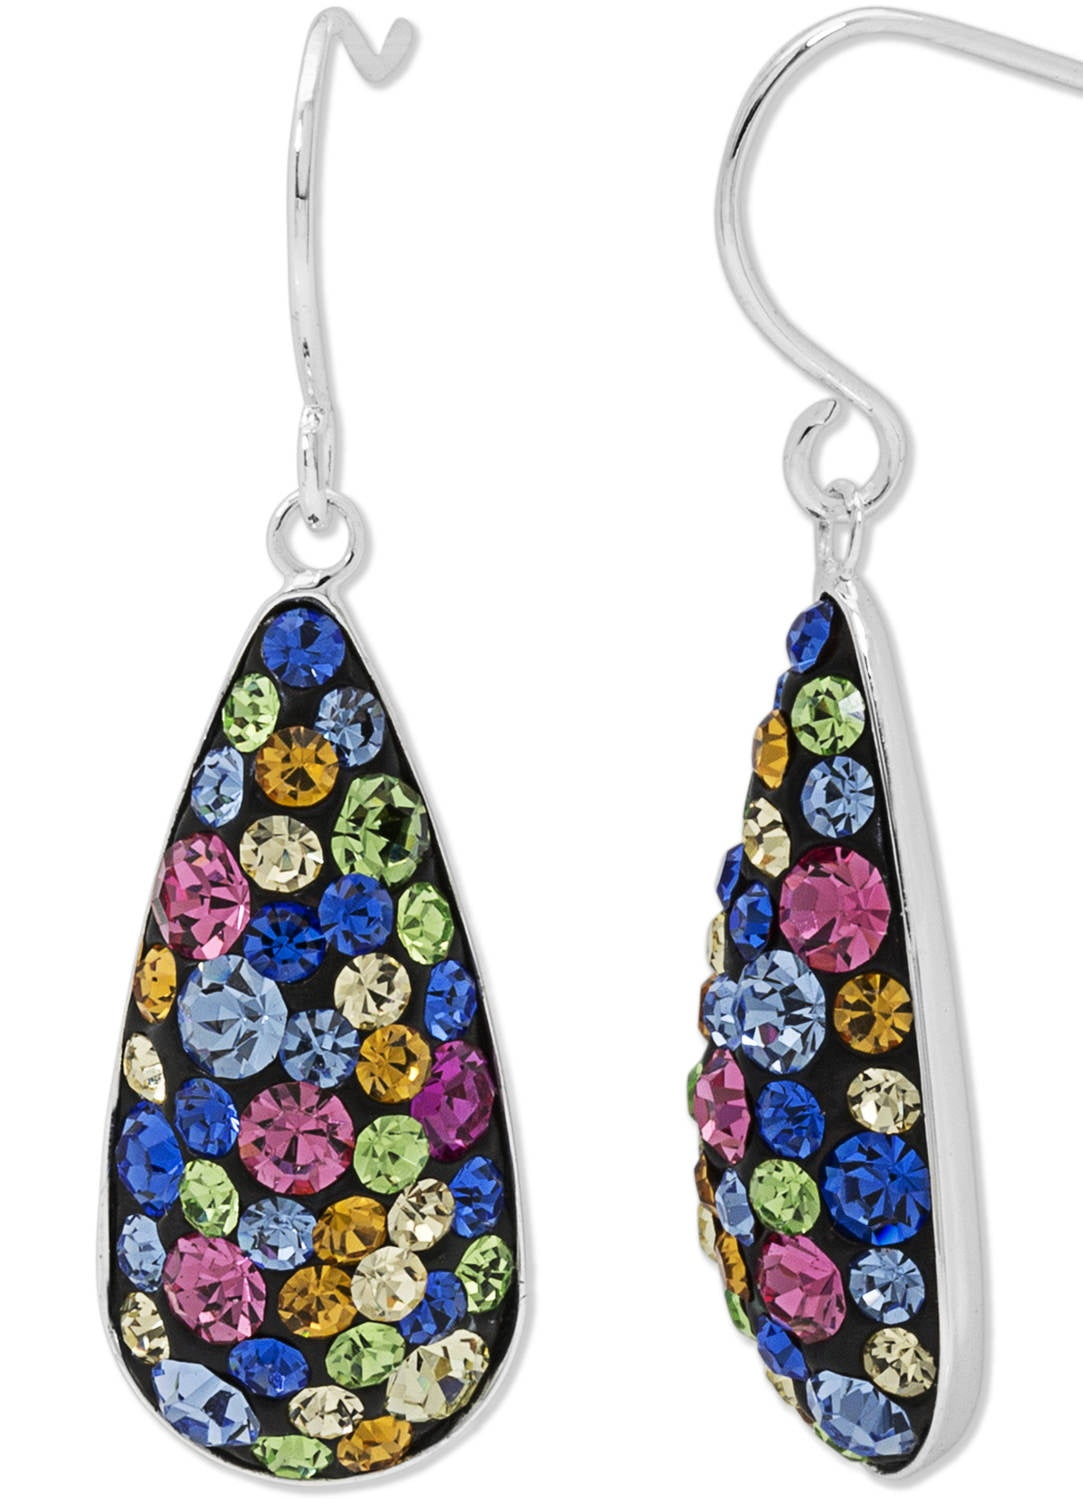 Large Teardrop Bronze Hoops with Sun Burst Multi Colored Crystal Charm